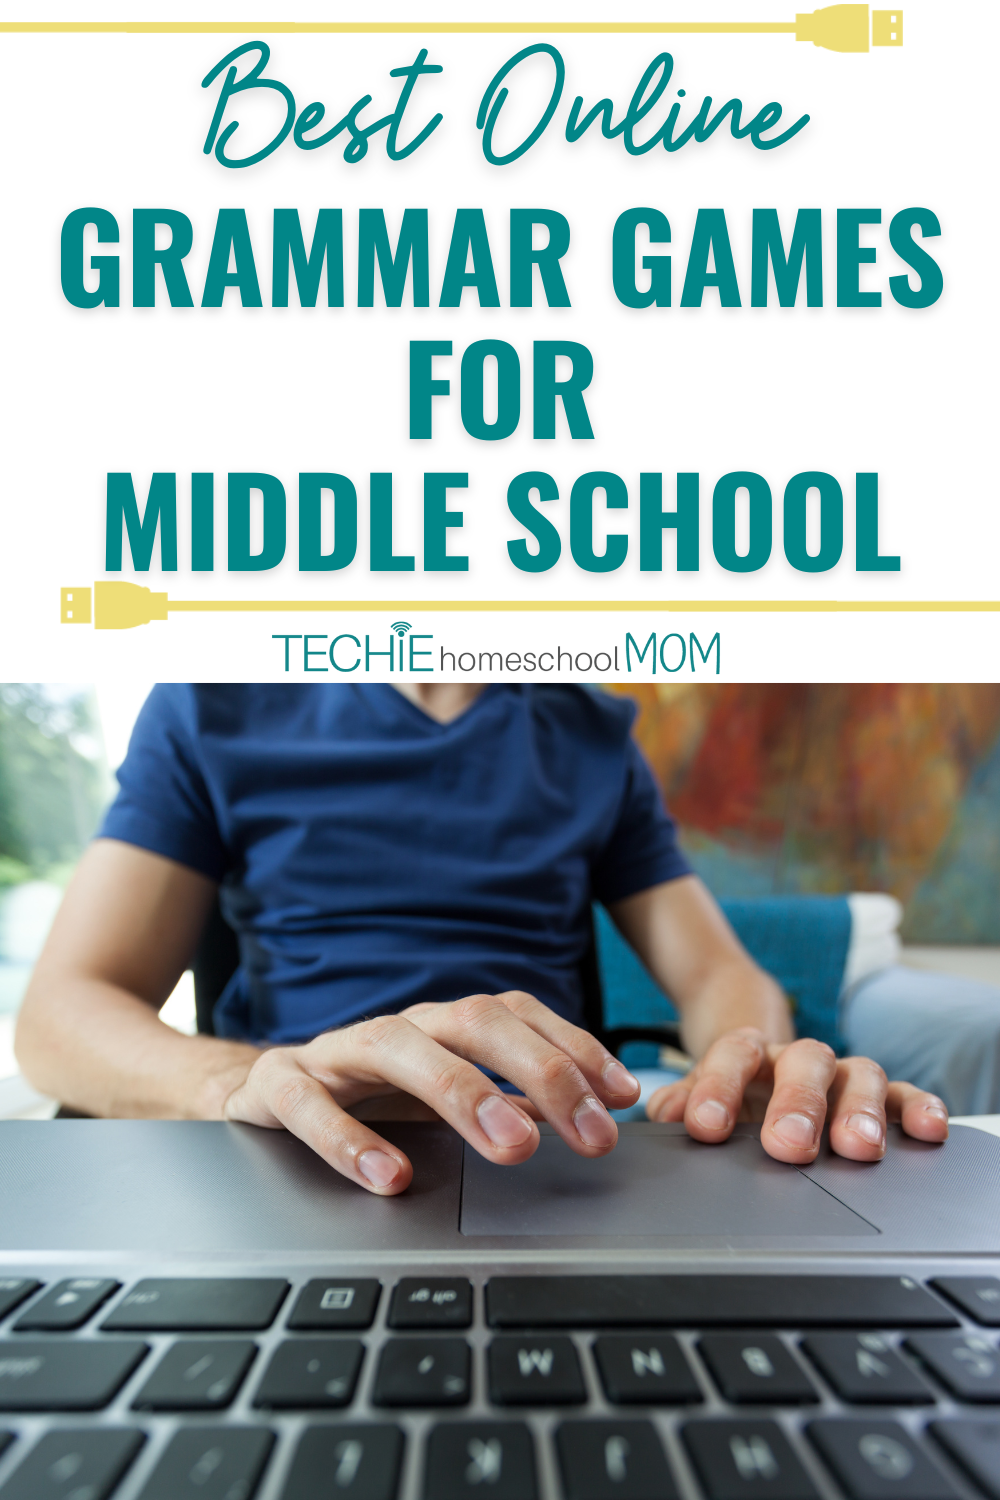 18-of-the-best-online-grammar-games-for-middle-school